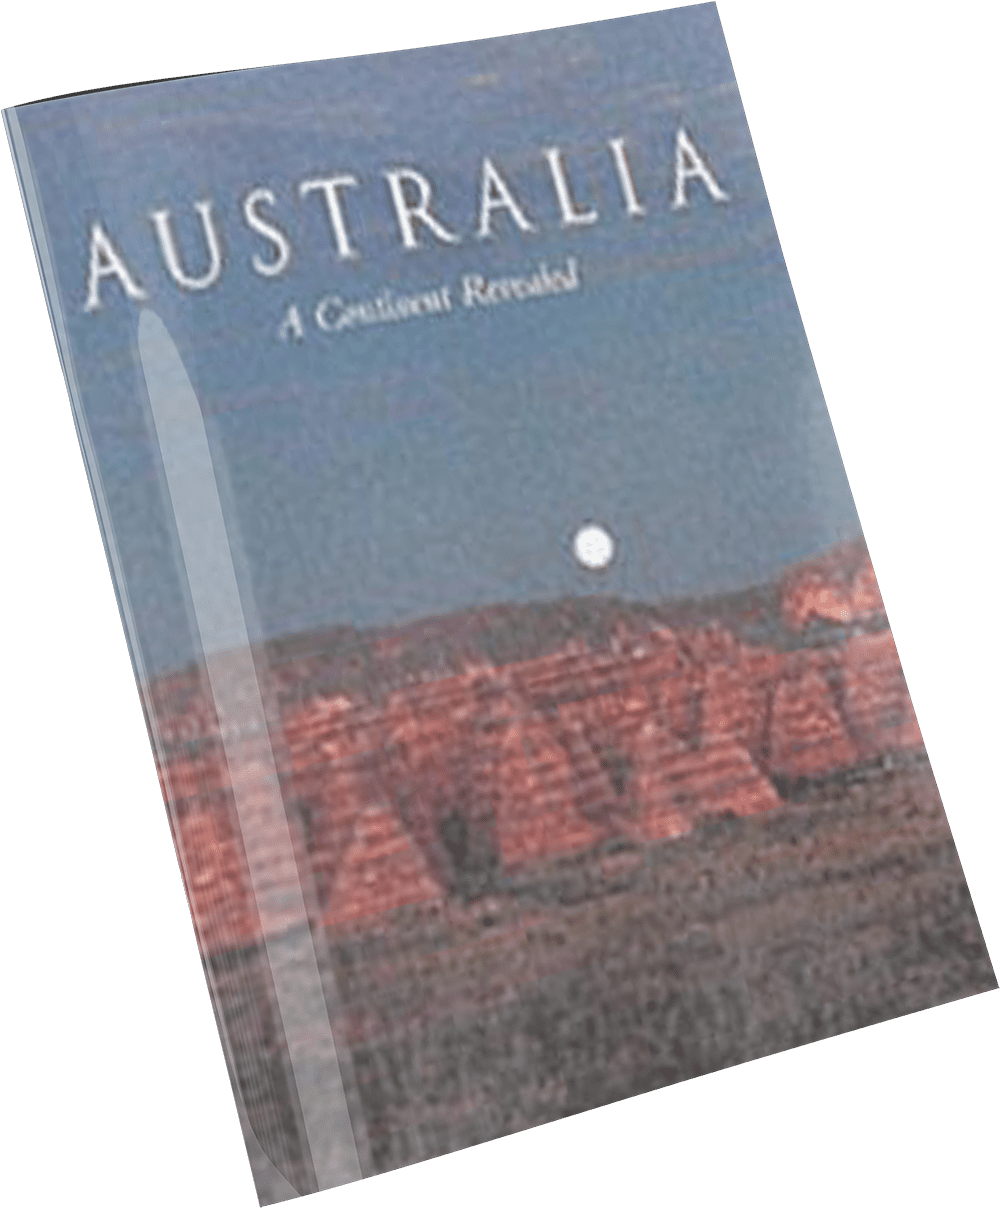 Neil Hermes Book: Australia: A Continent Revealed